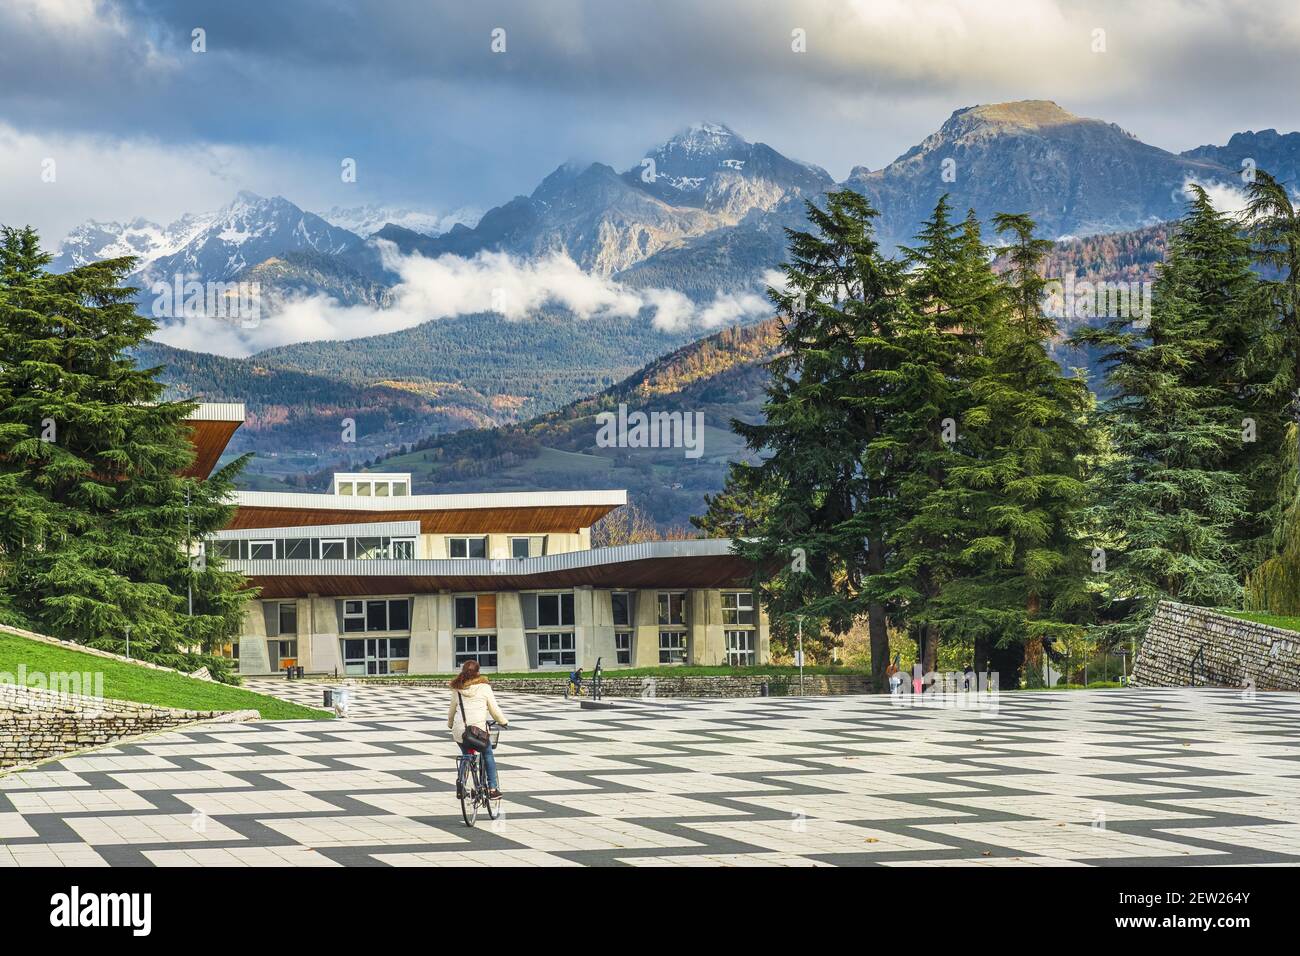 France, Isere, Saint Martin d'Heres, Grenoble Alpes University, Saint  Martin d'Heres Campus, Joseph-Fourier University Library, Belledonne massif  in the background Stock Photo - Alamy